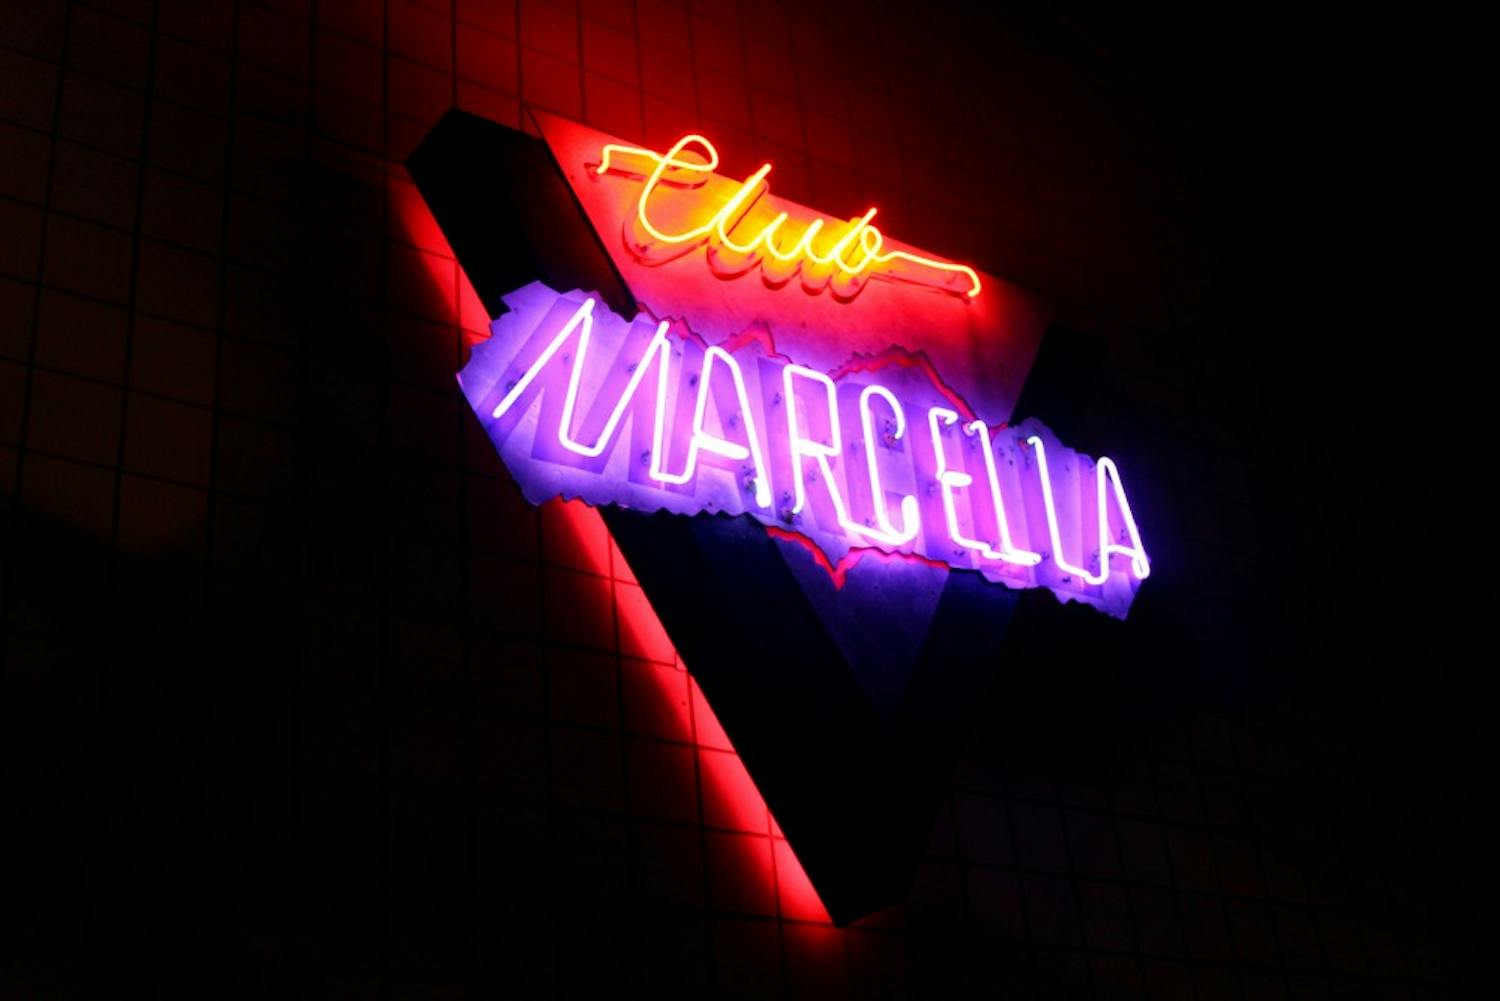 Club Marcella is the oldest and largest gay nightclub in Western New York and has been around for 22 years. The club is located on Pearl Street right off of Chippewa Street in the heart of downtown Buffalo.